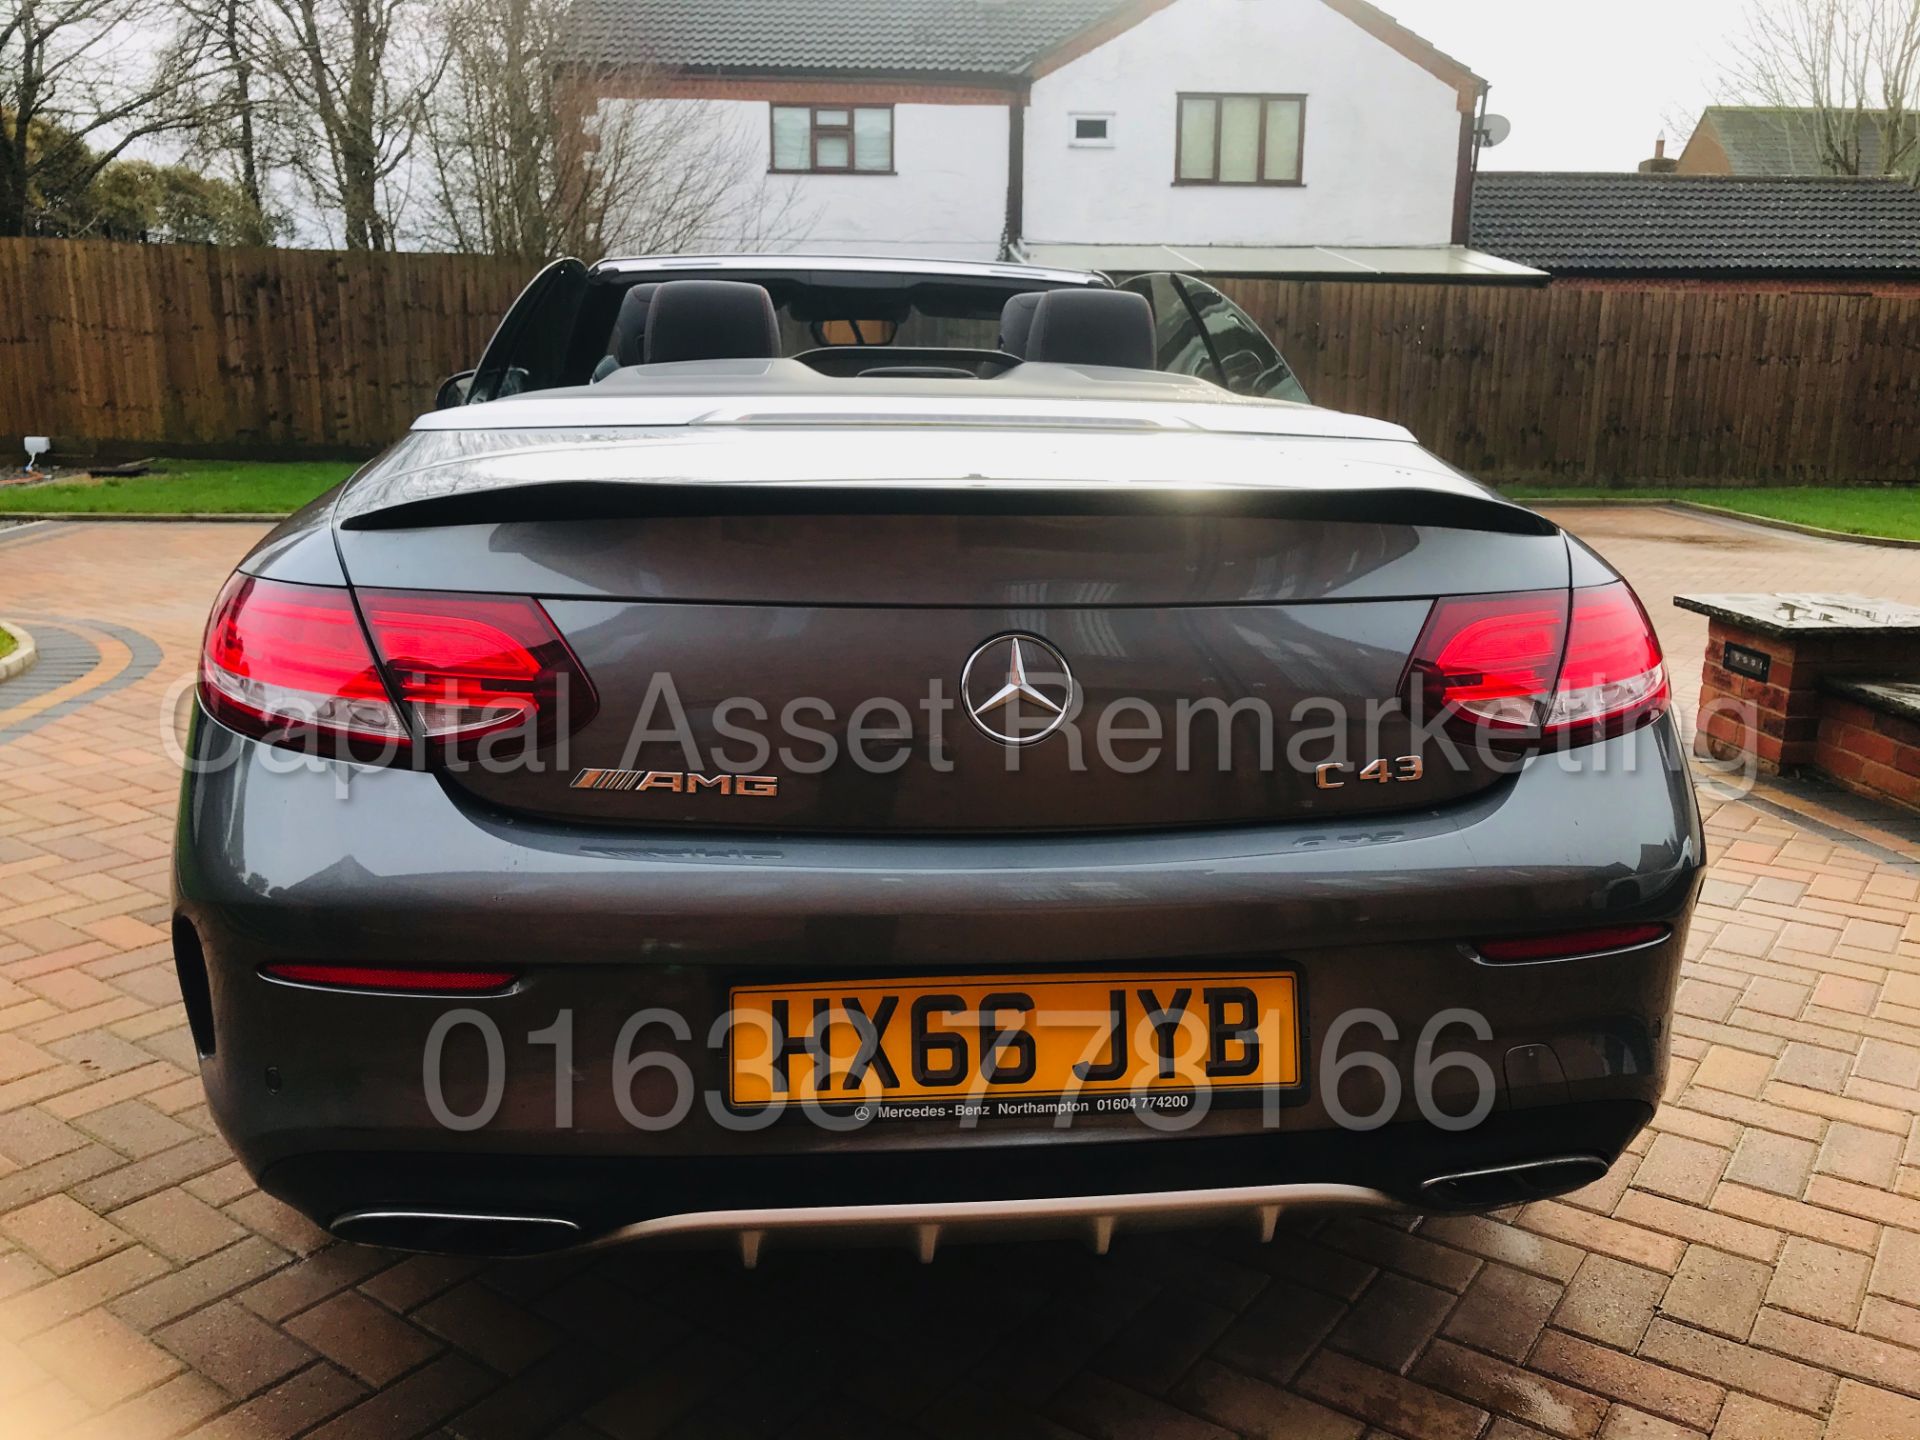 ON SALE MERCEDES-BENZ C43 *AMG BI-TURBO* CABRIOLET (2017) '3.0 V6 - 367 BHP - 4 MATIC - 9 SPEED AUTO - Image 22 of 59